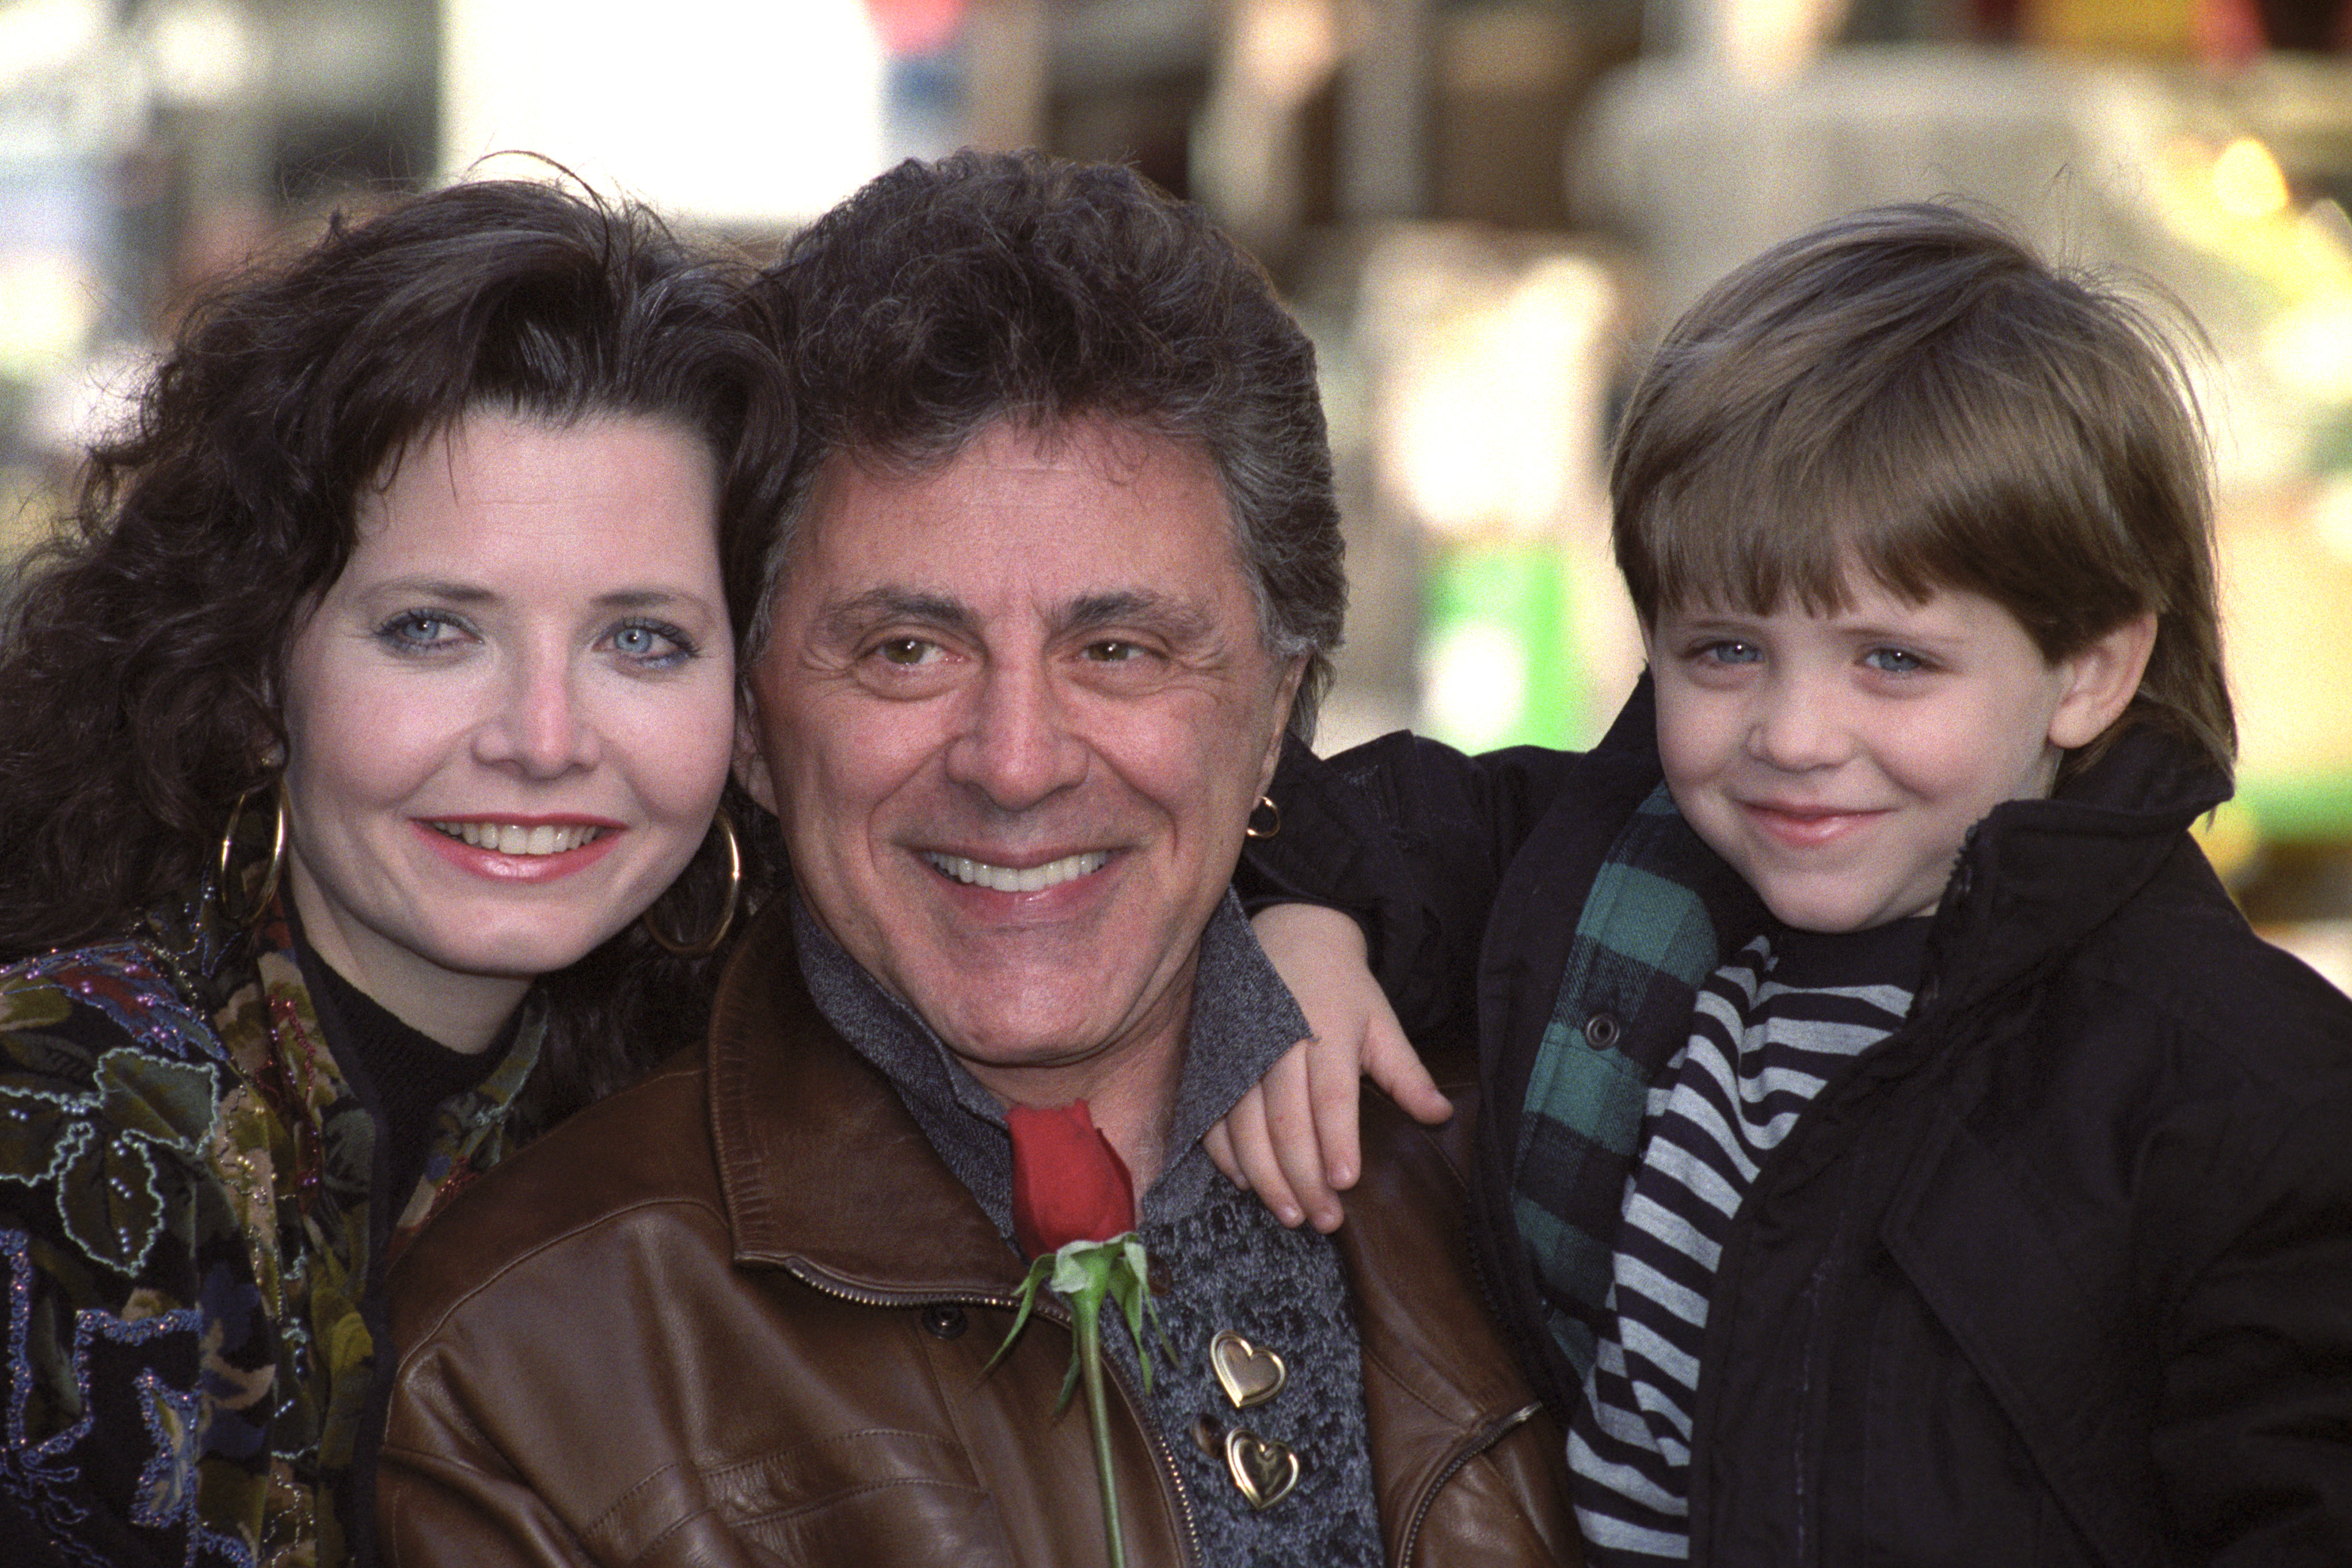 Frankie Valli with his wife Randy and their son Francesco outside the London Palladium on February 13, 1992 | Source: Getty Images